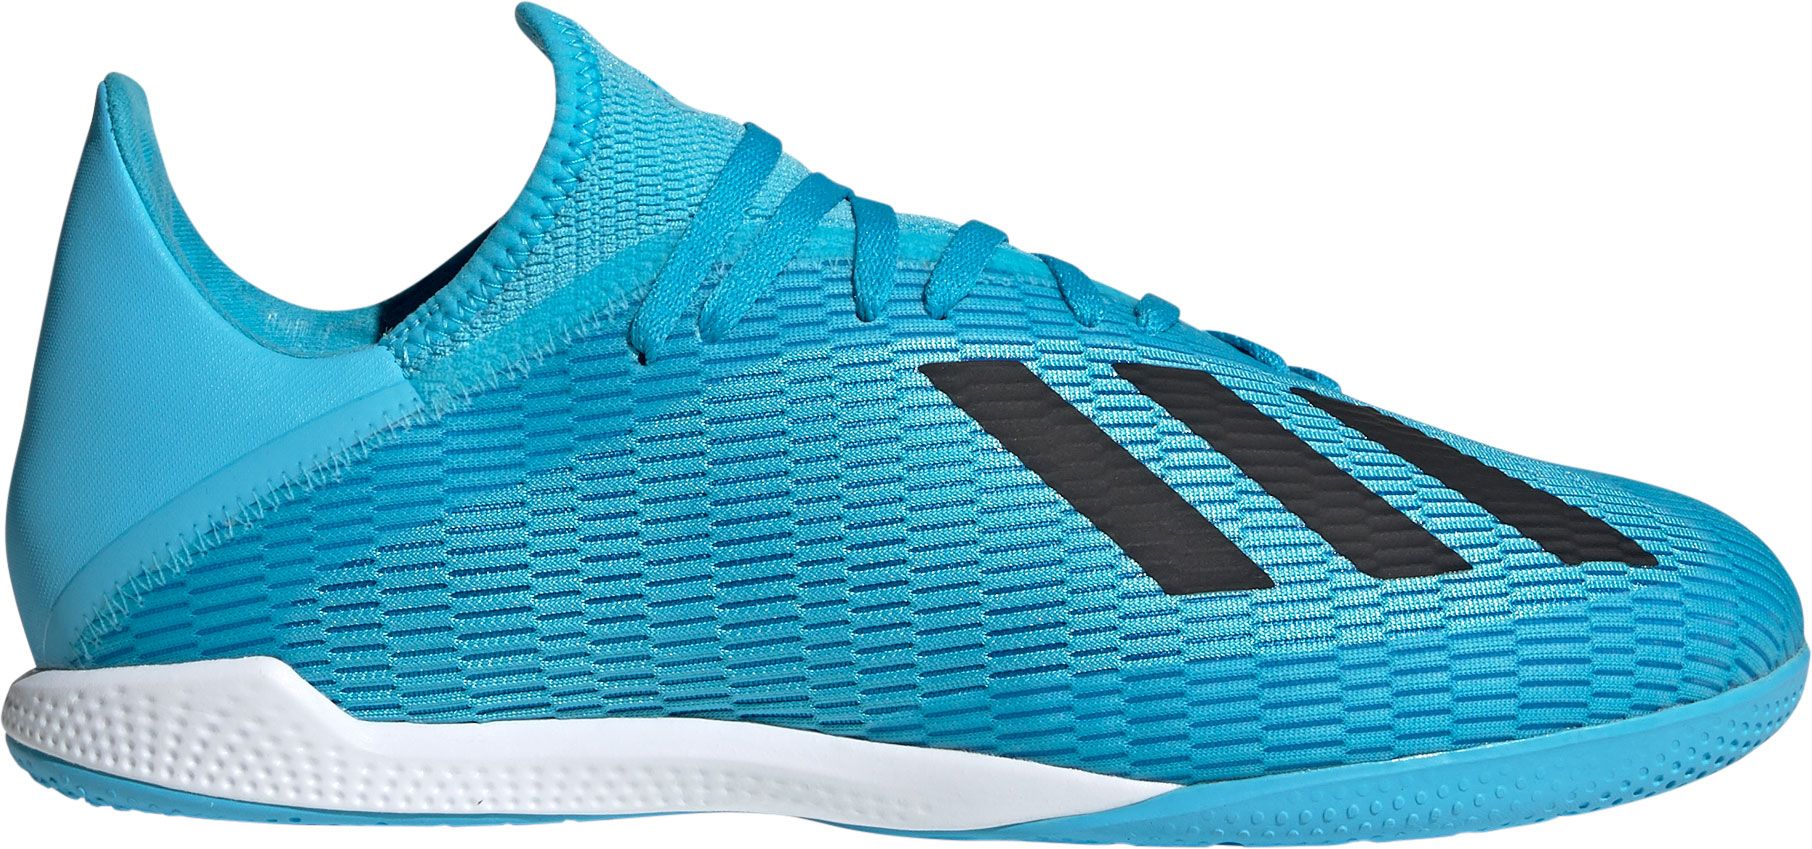 Indoor Soccer Shoes | Best Price Guarantee at DICK'S